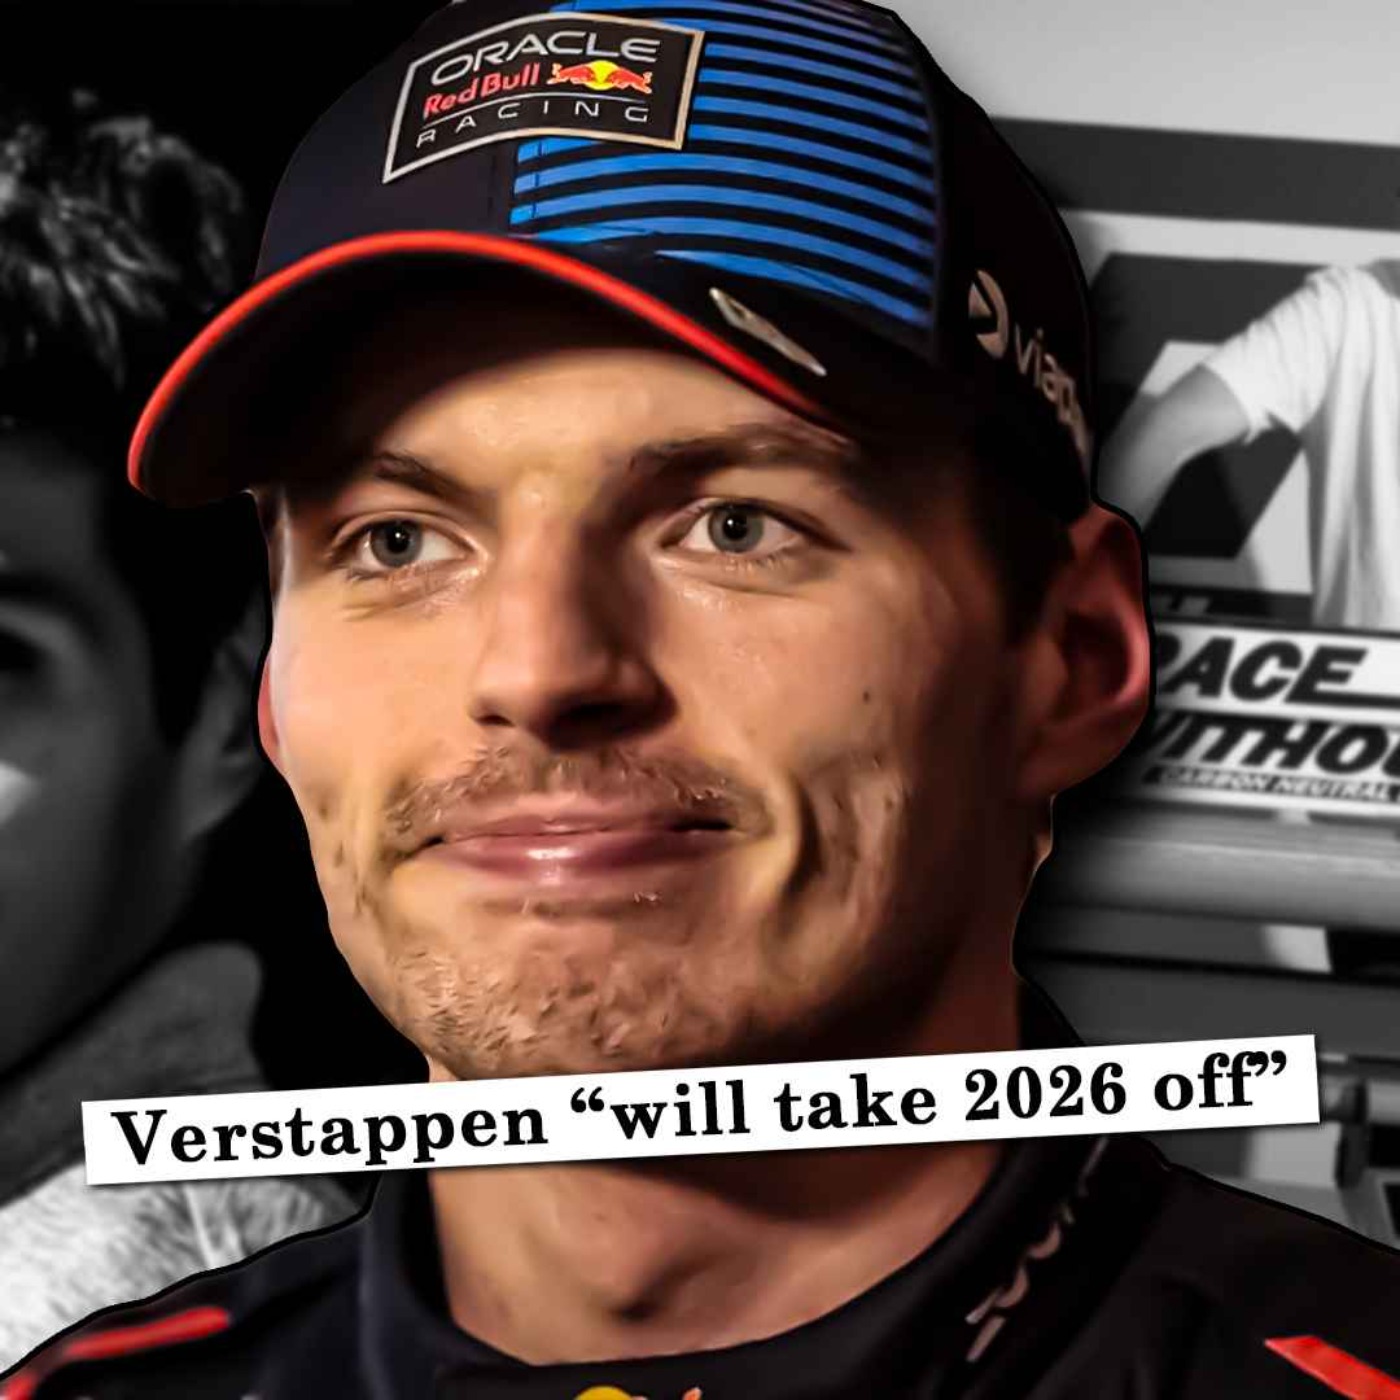 cover art for Max Verstappen "will take 2026 off" says Chandhok - seriously?